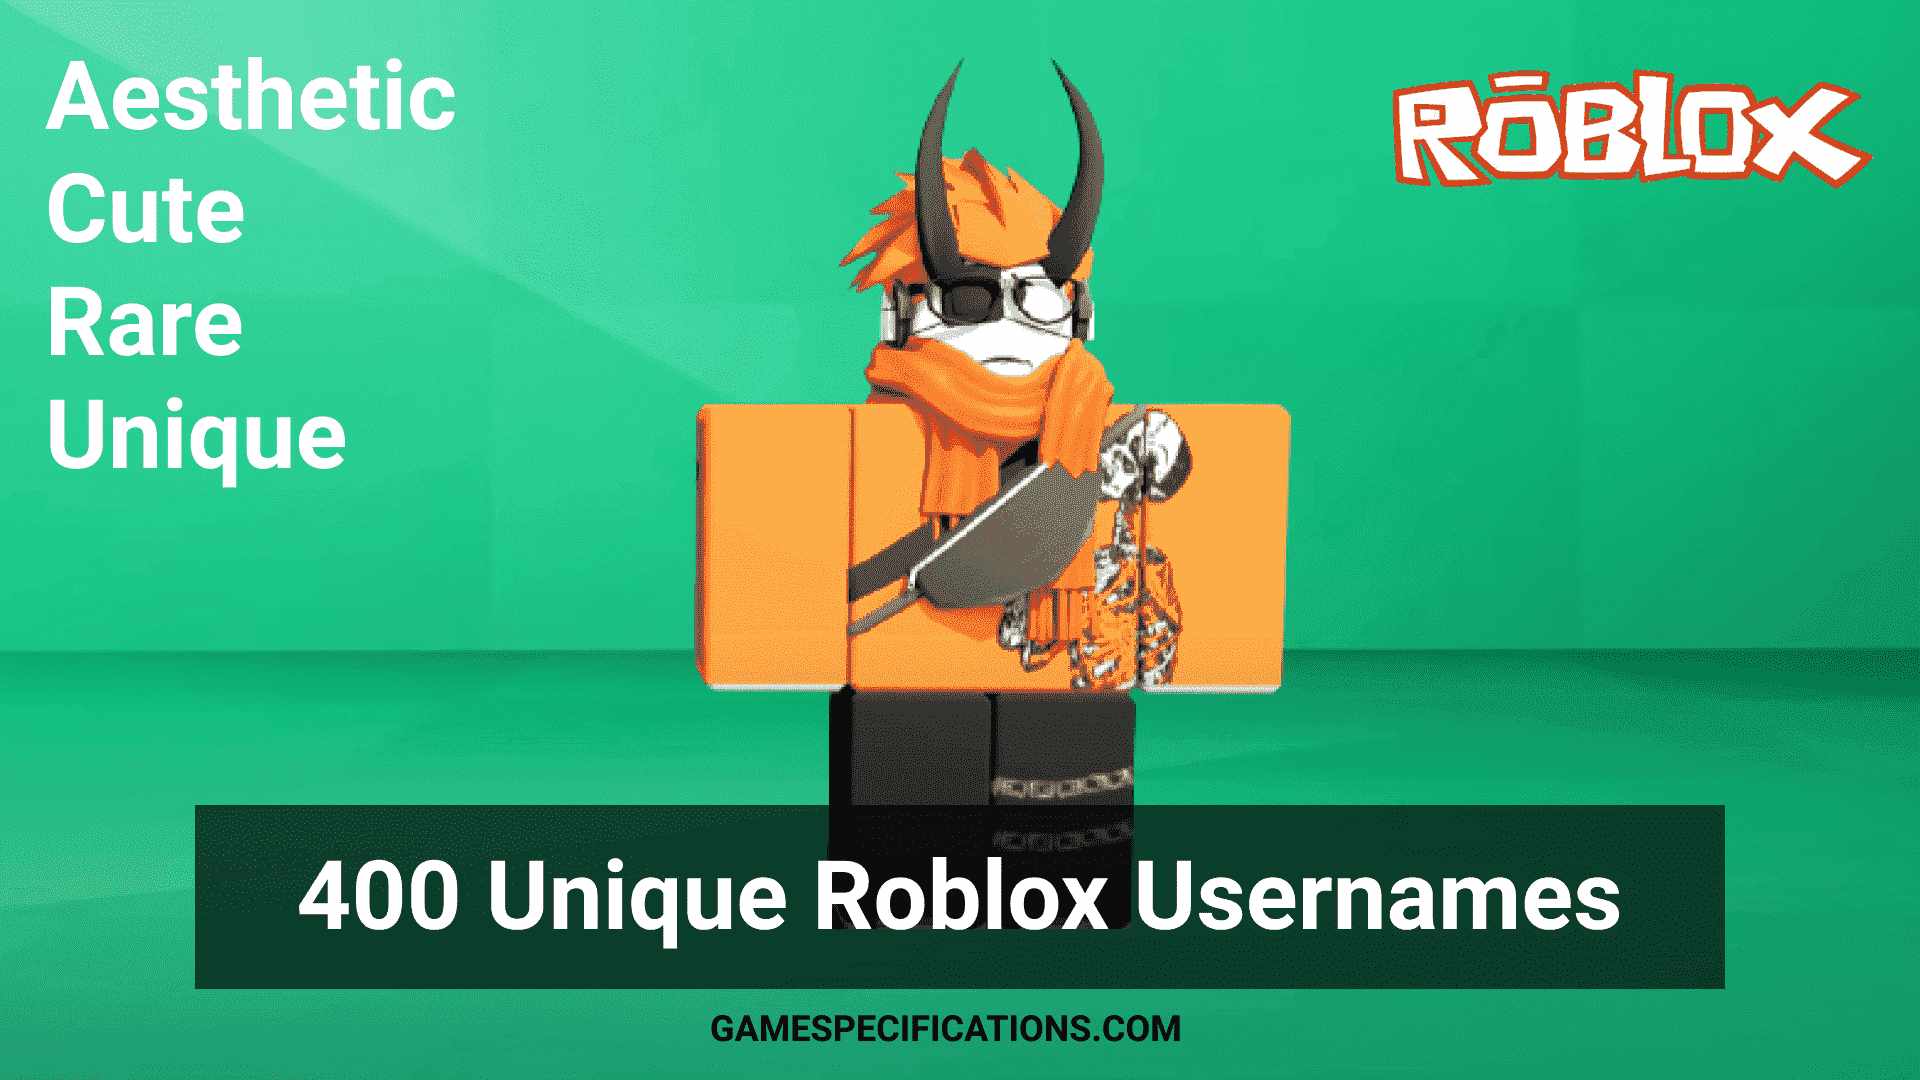 List Of 500 Roblox Usernames Cute Aesthetic Rare And Unique Game Specifications - roblox username and password ideas